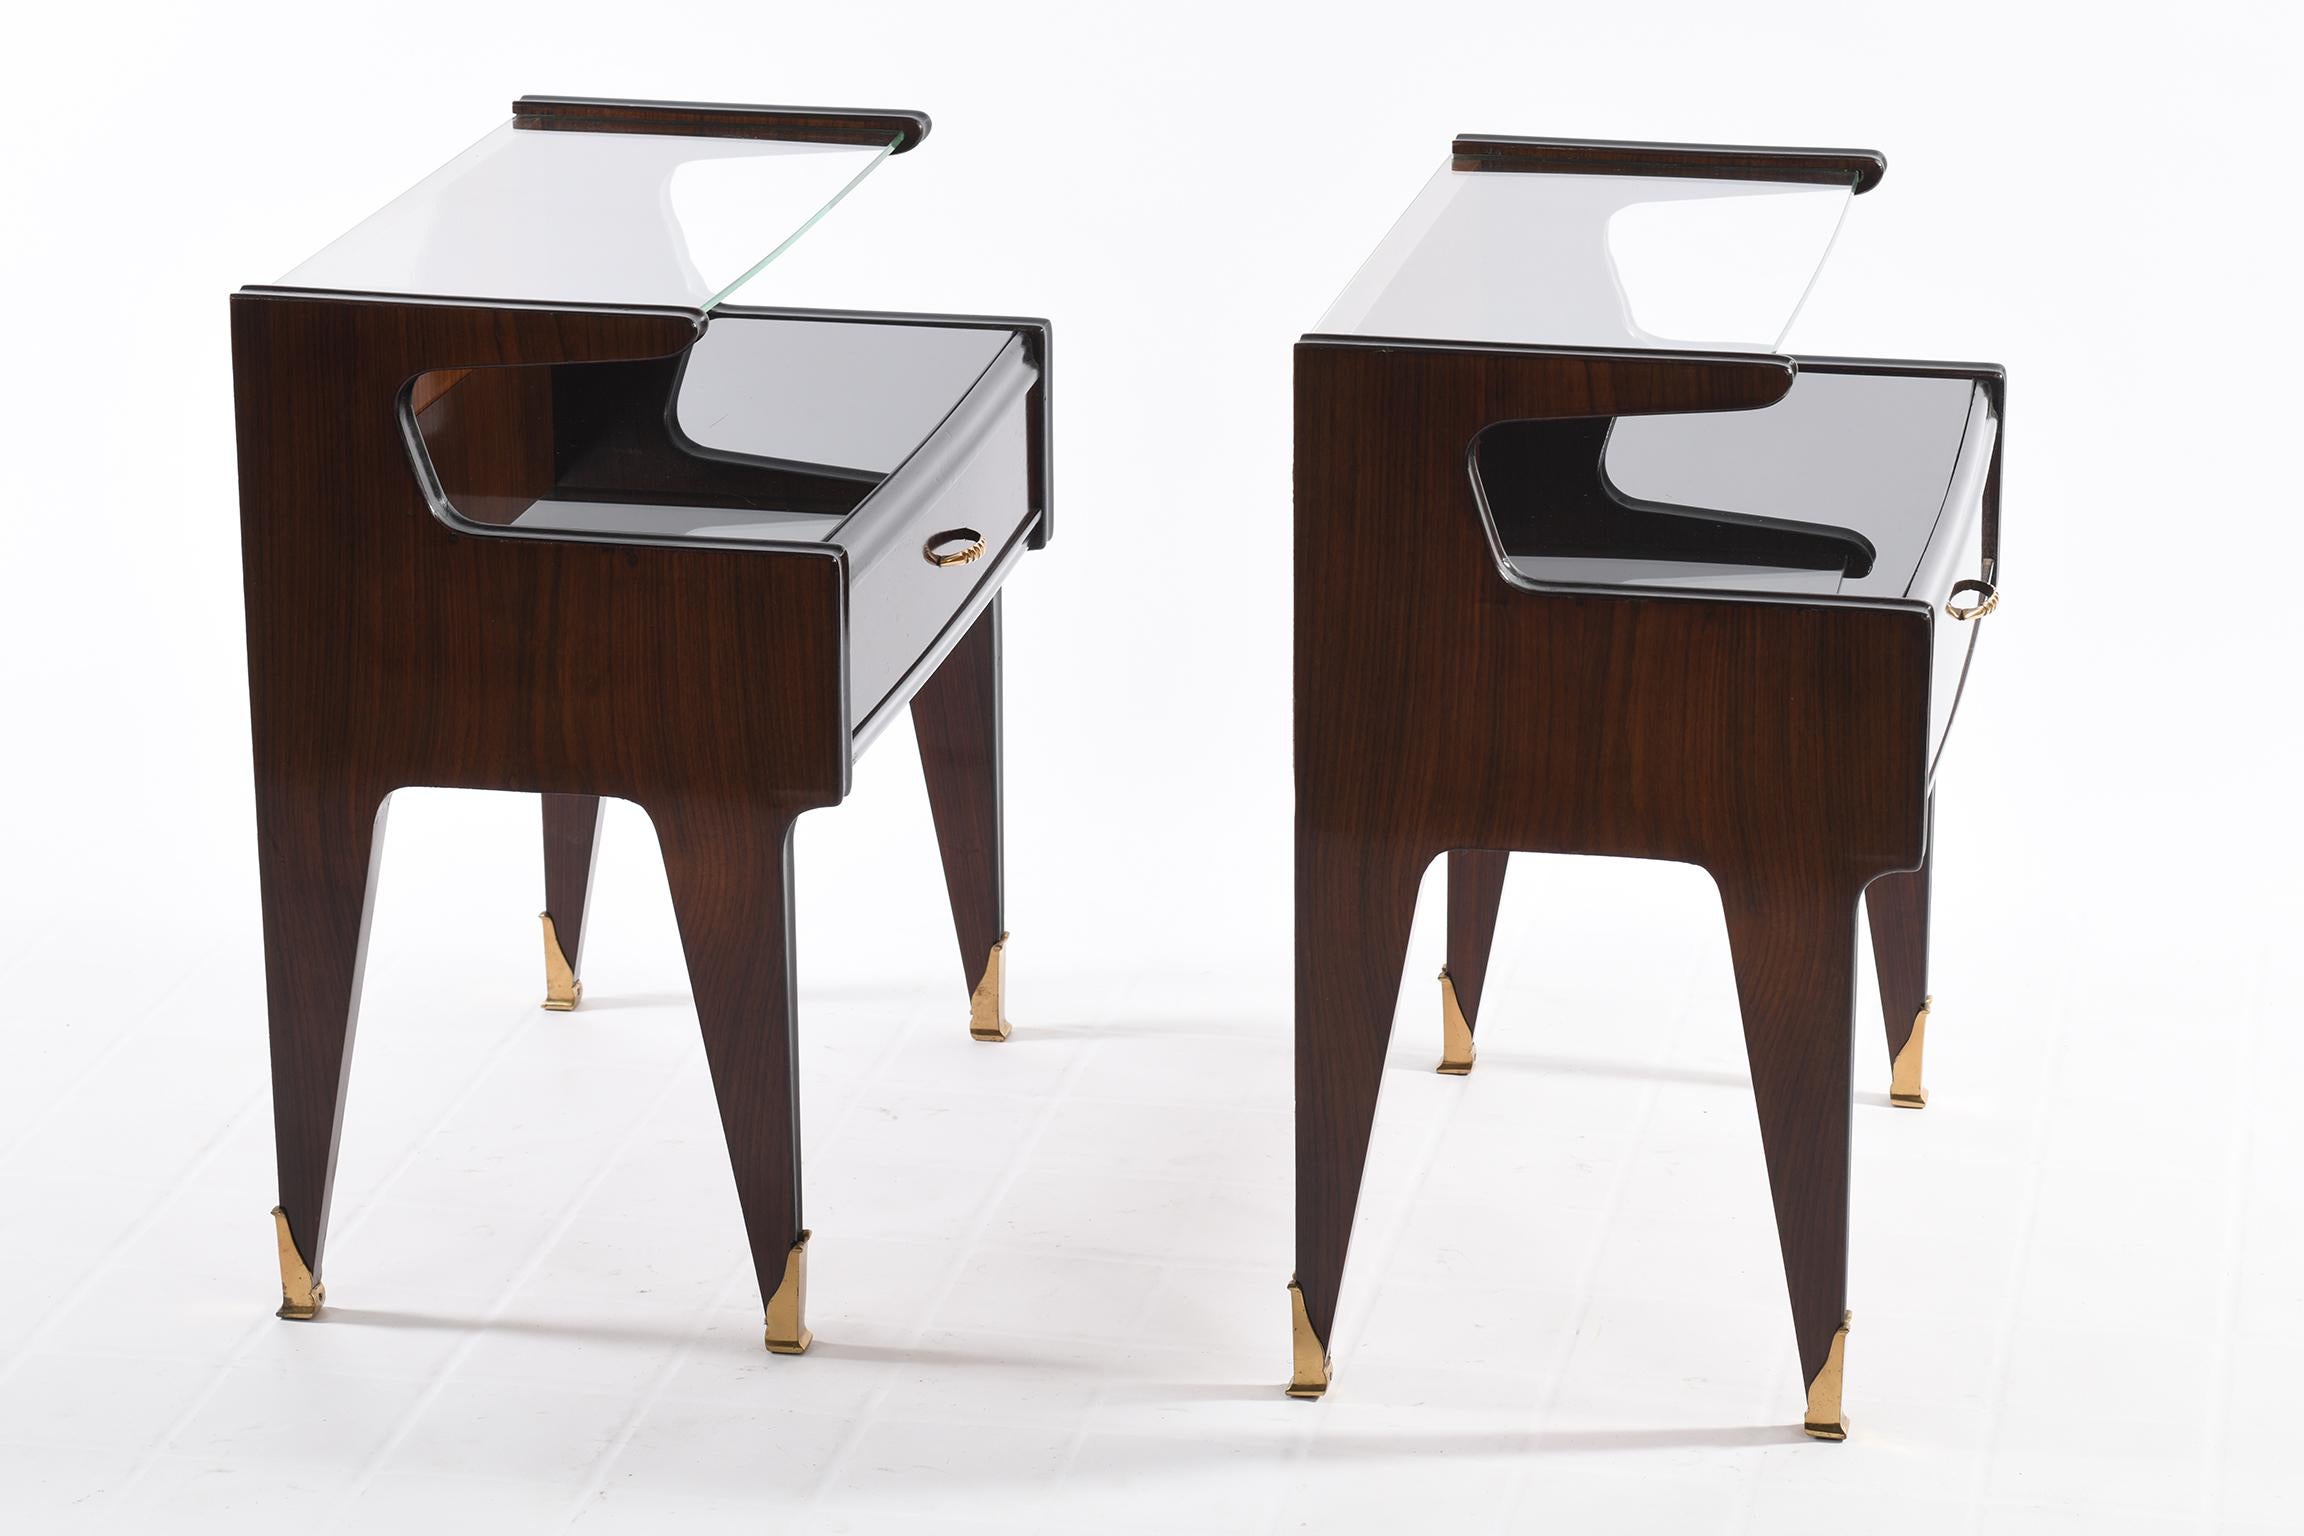 Pair of Italian bedside tables with double top, the lower one in black glass, the upper one in transparent glass, has a drawer with precious wood arranged in a herringbone pattern.
Handle and feet in cast brass.
 Dassi Manufacture Italy 1950's